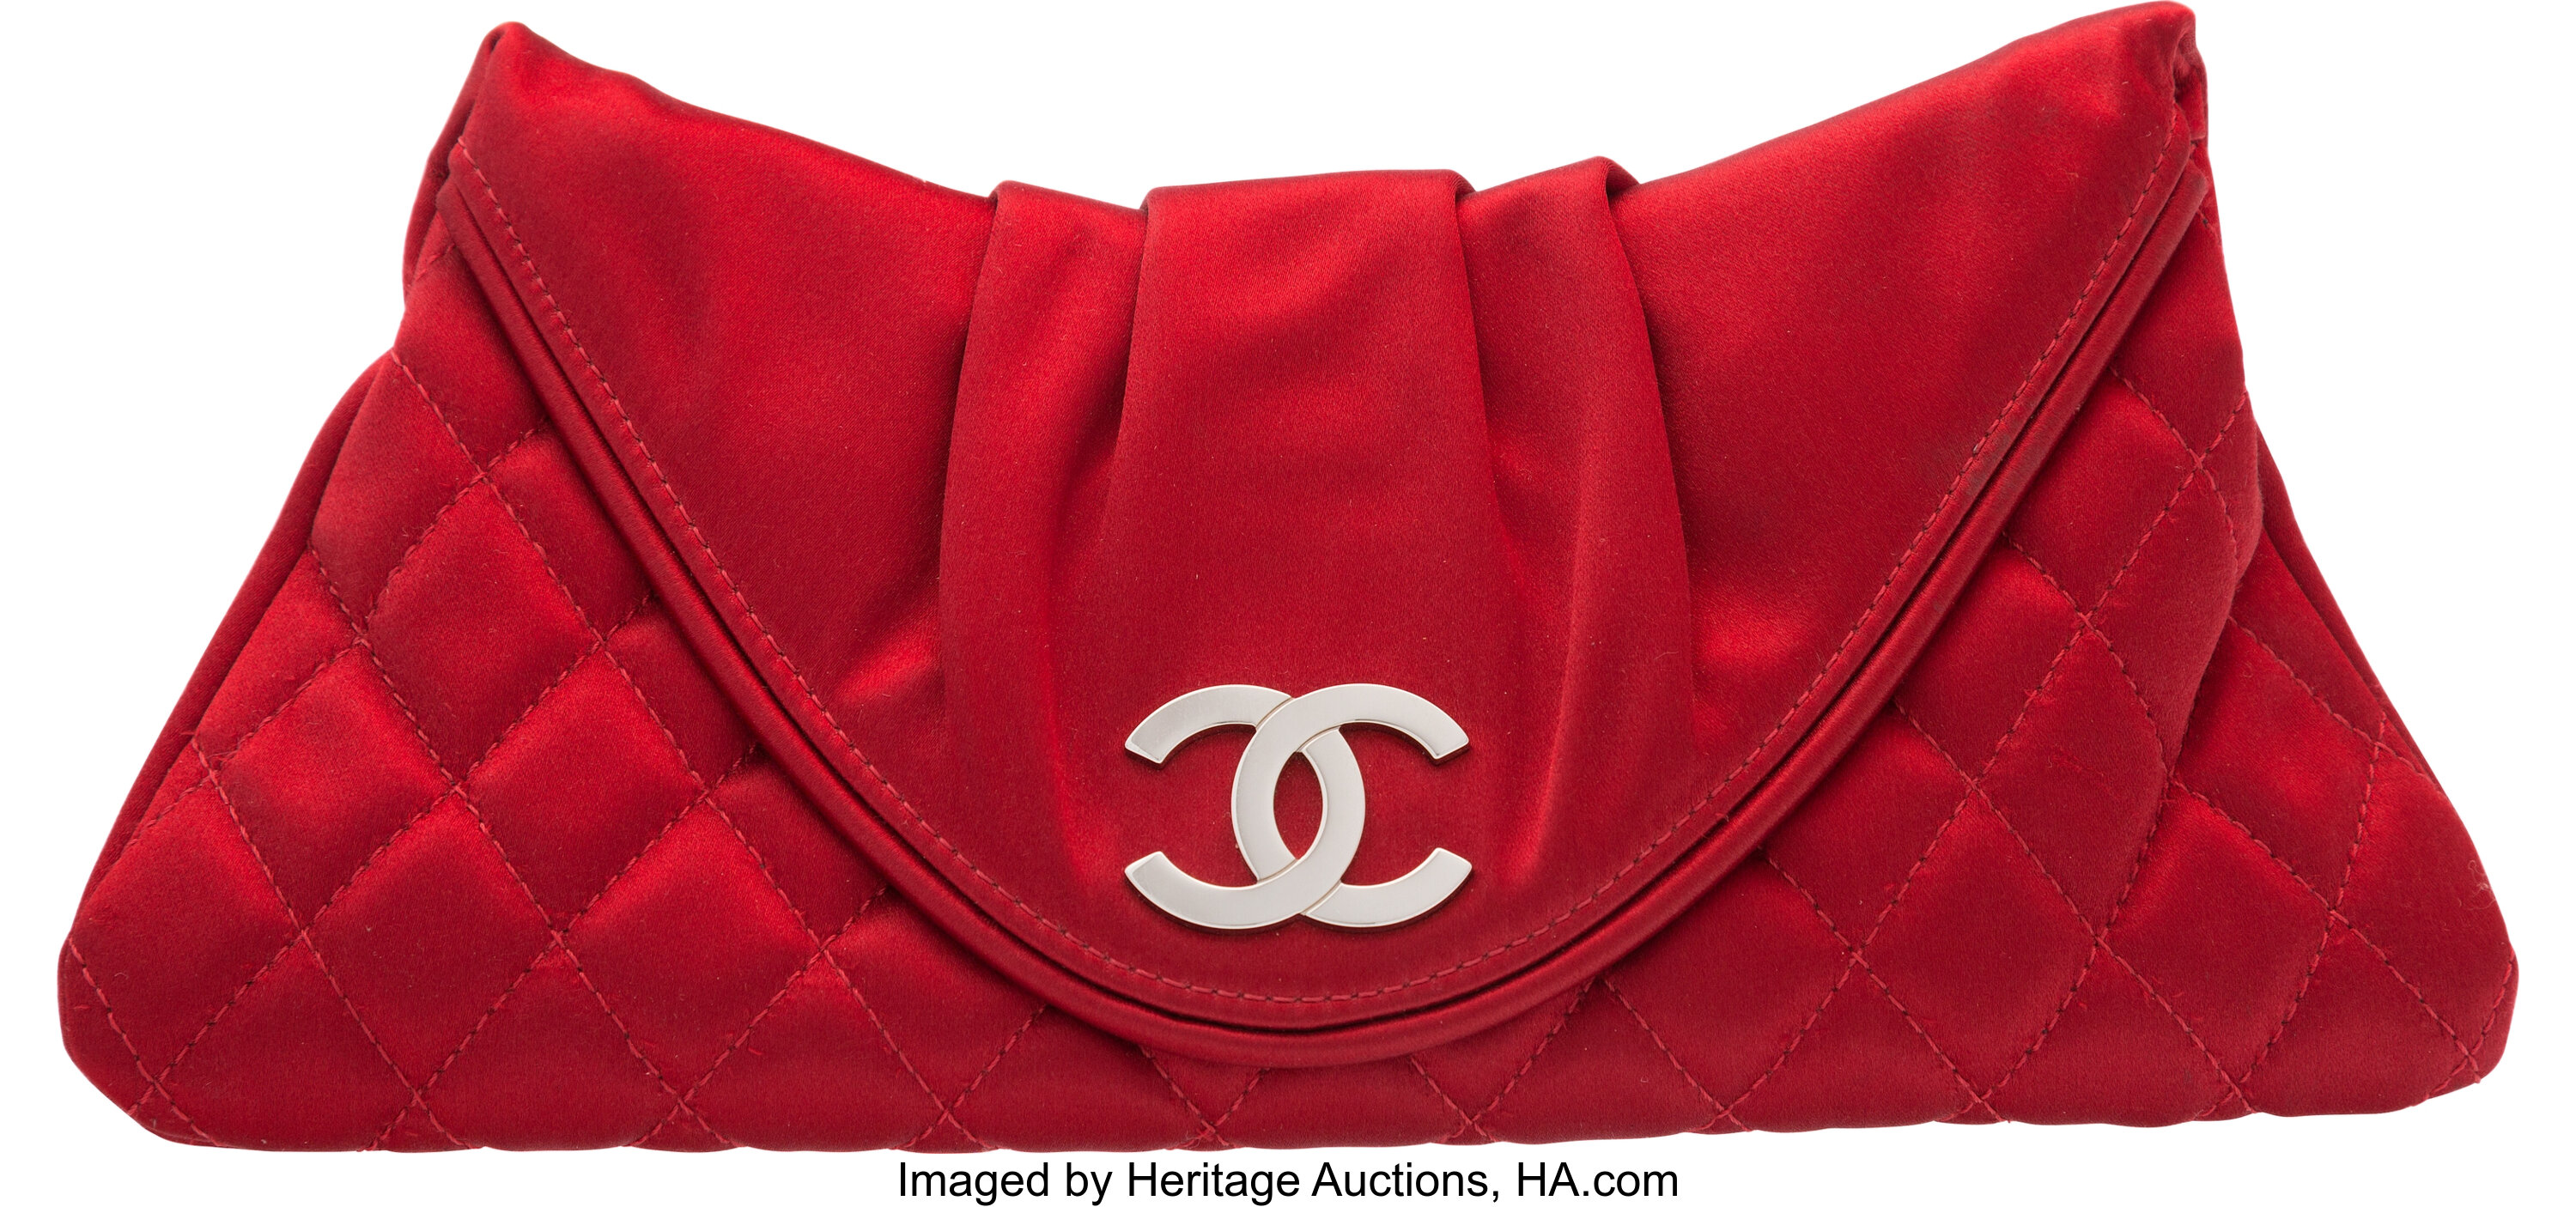 Chanel Red Quilted Satin Half Moon Clutch Bag. Very Good Condition., Lot  #58432